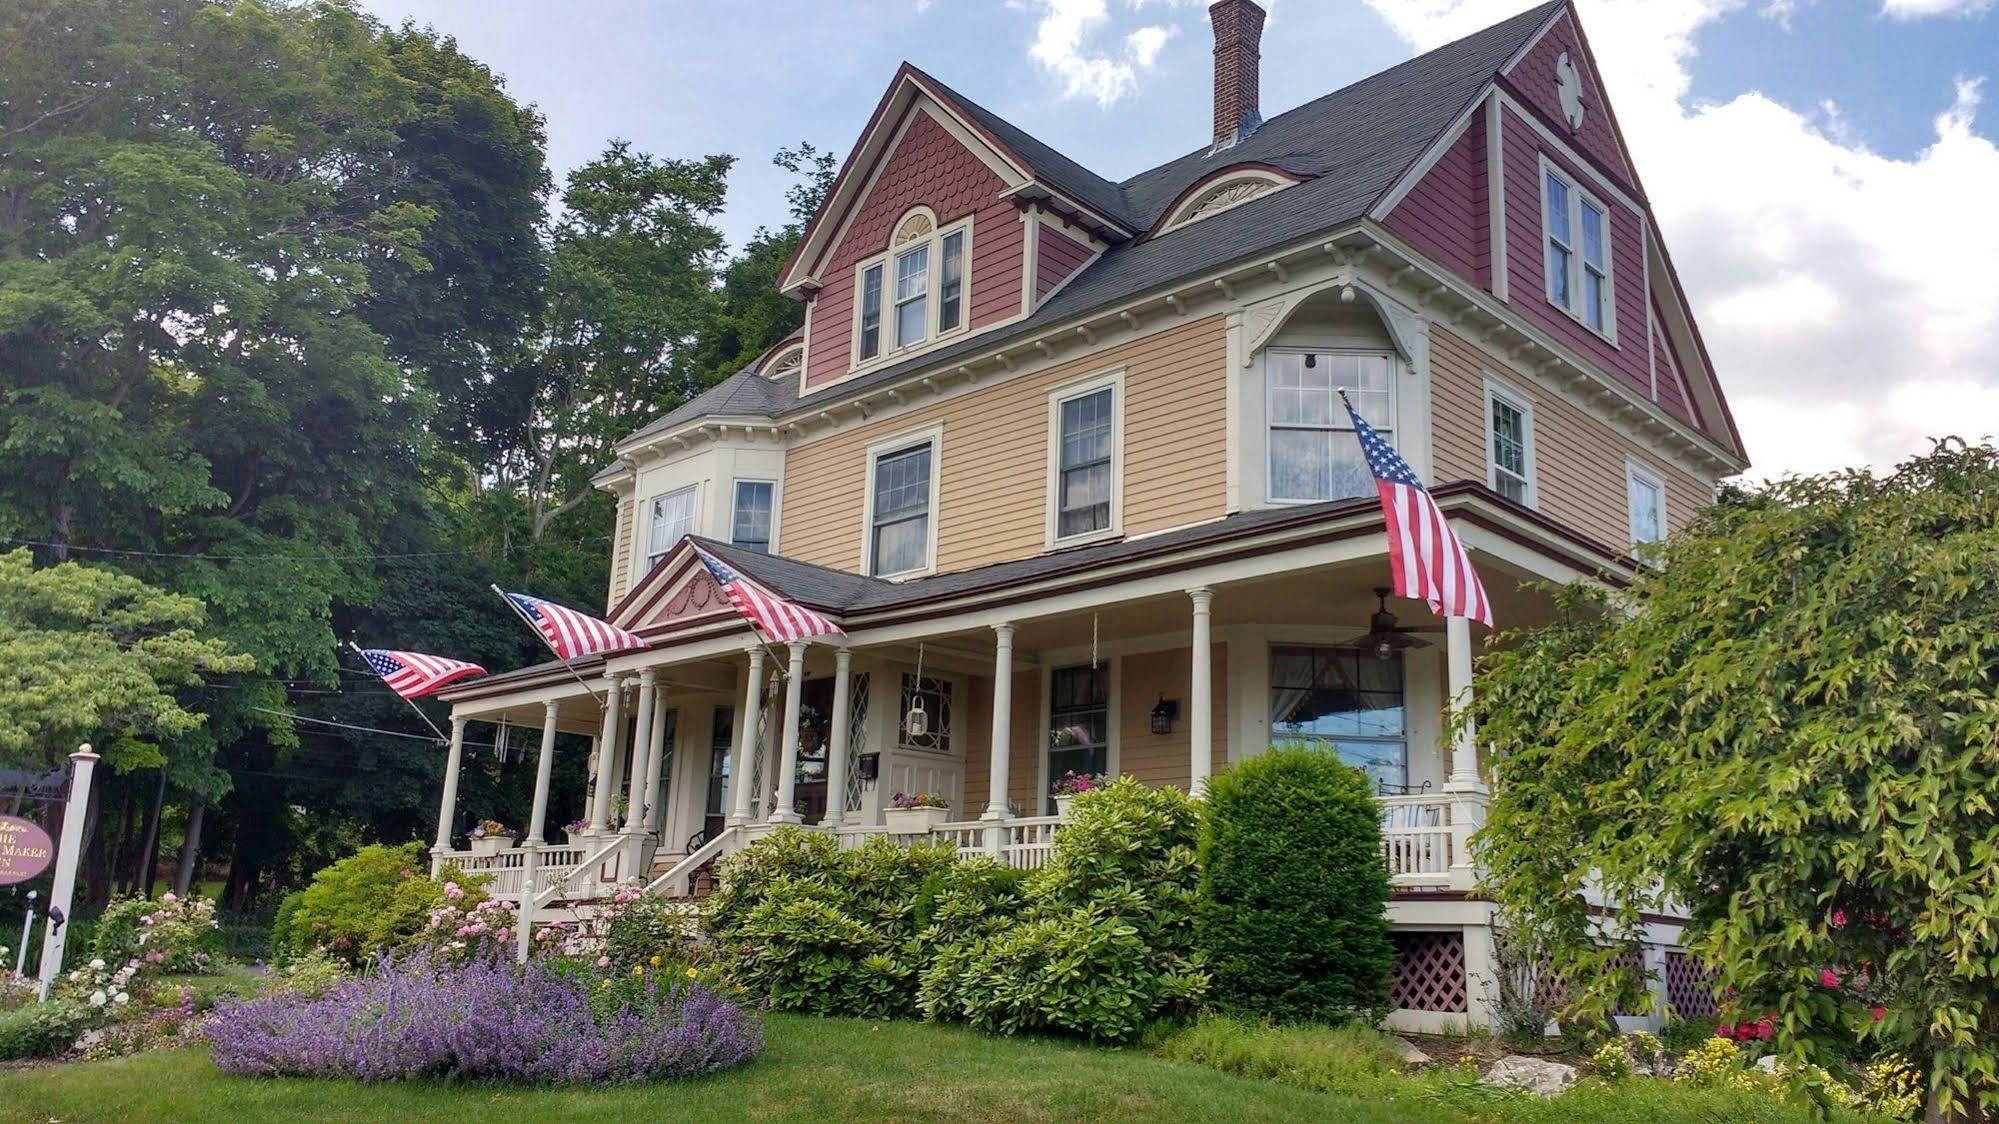 The Sleigh Maker Inn Bed And Breakfast Westborough Exterior photo